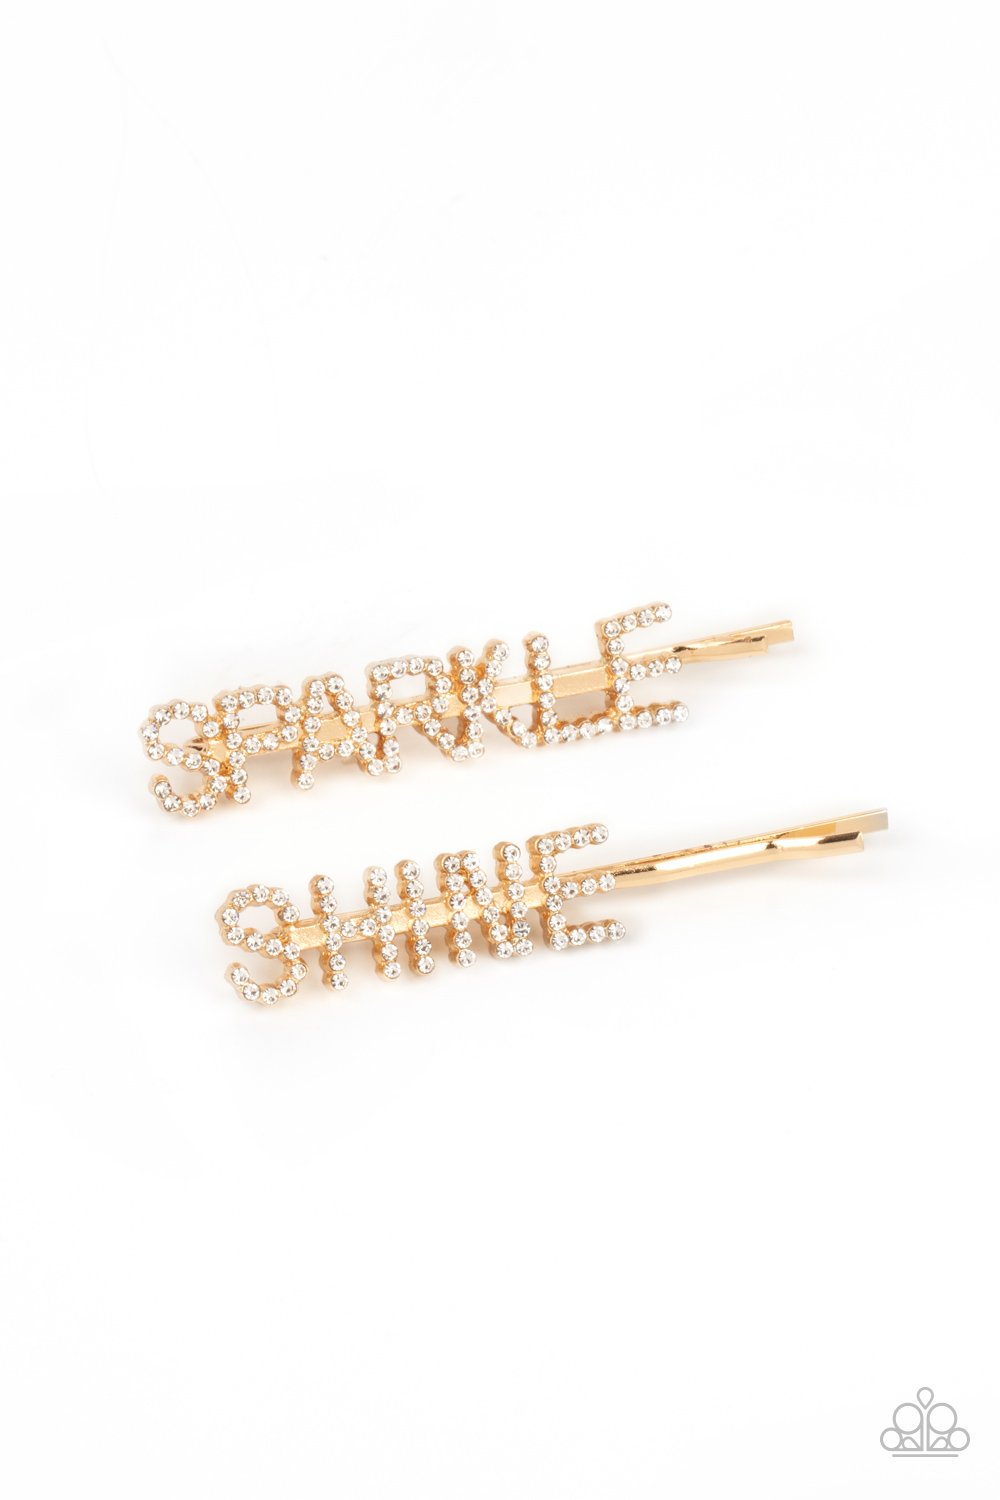 &lt;p&gt;Glassy white rhinestones spell out \&quot;Sparkle,\&quot; and \&quot;Shine,\&quot; across the fronts of two gold bobby pins, creating a sparkly duo.&lt;/p&gt;
&lt;p&gt;&lt;i&gt;Sold as one pair of decorative bobby pins.&lt;/i&gt;&lt;/p&gt;